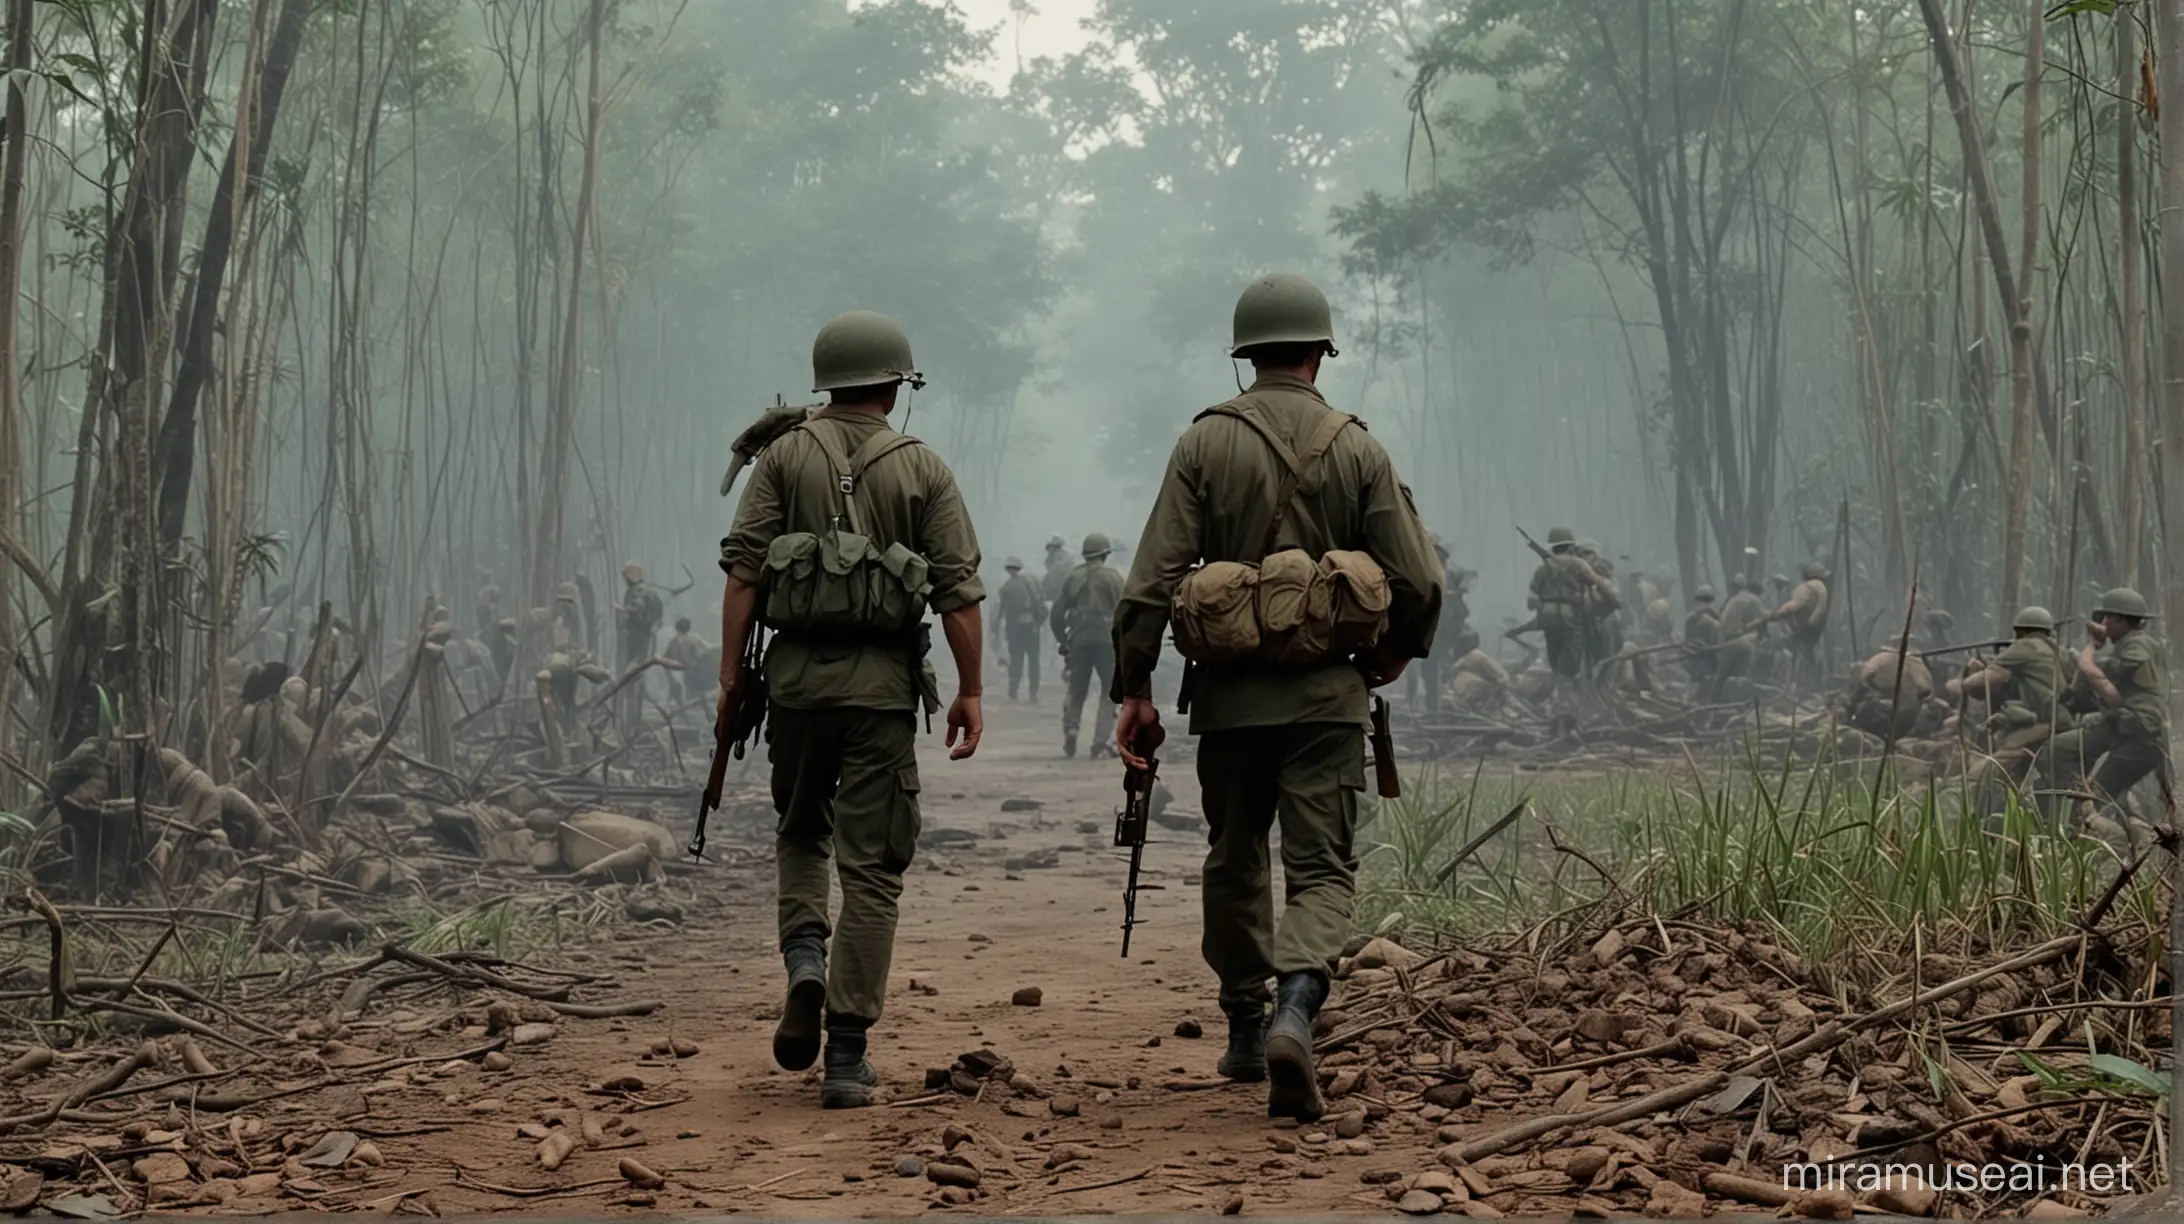 Witness the chaos and destruction of the Vietnam War through the eyes of an American soldier, as he navigates the treacherous jungles and faces the harsh realities of war